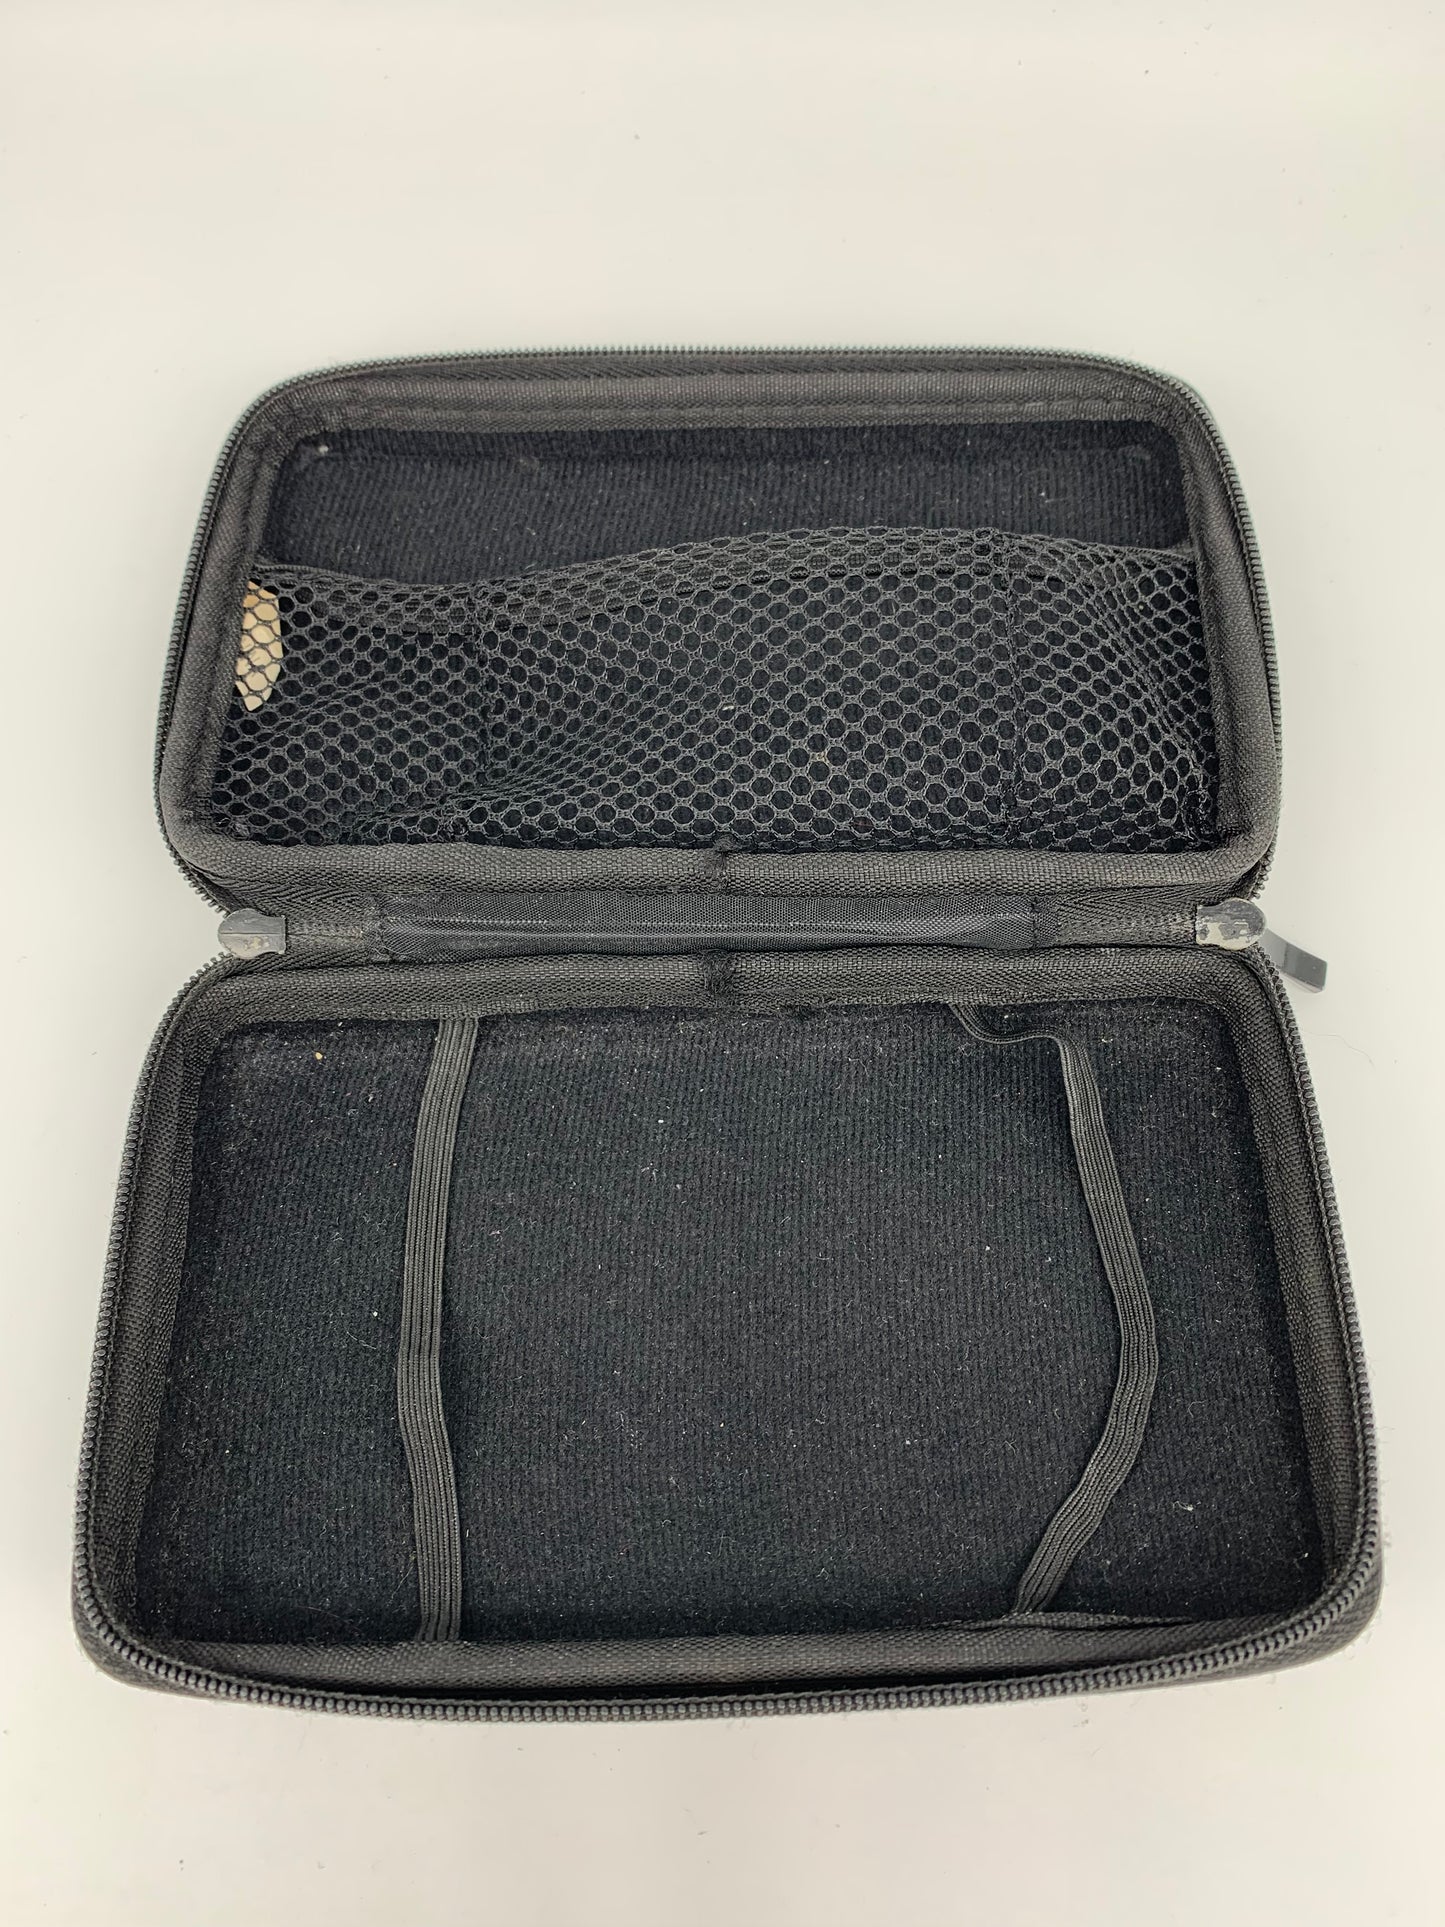 NiNTENDO DS XL | CARRYiNG CASE